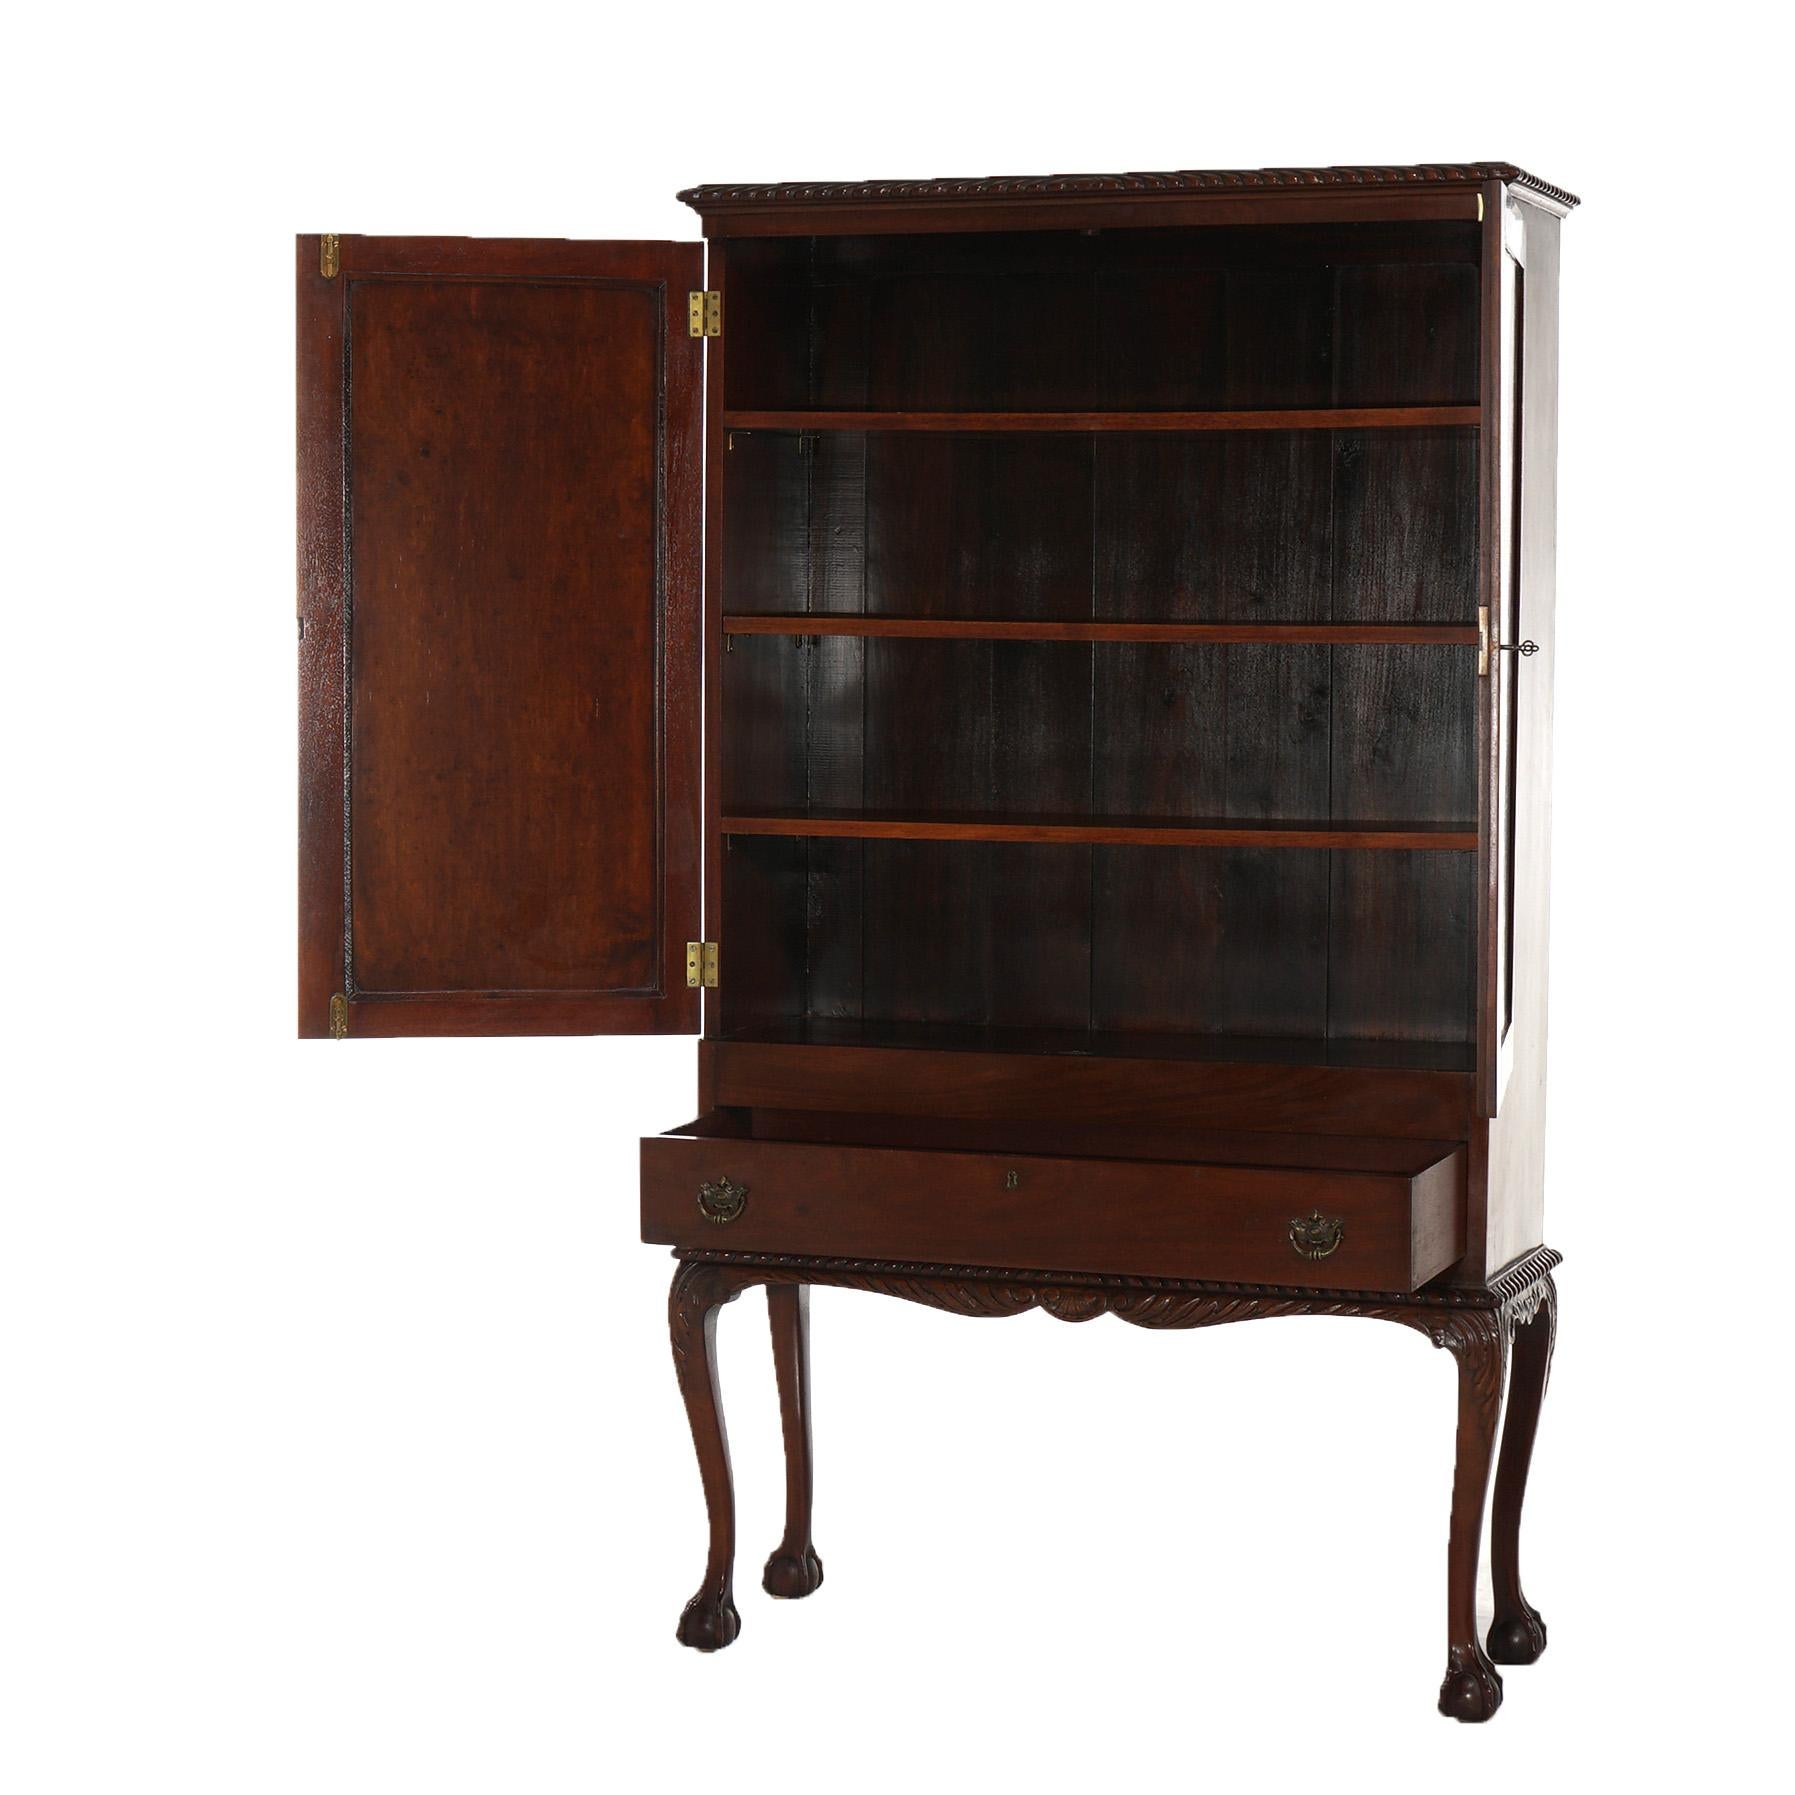 ***Ask About Reduced In-House Shipping Rates - Reliable Service & Fully Insured***
An antique Chippendale credenza offers mahogany construction with double door case opening to shelved interior and over single long drawer; gadroon edge surmounts